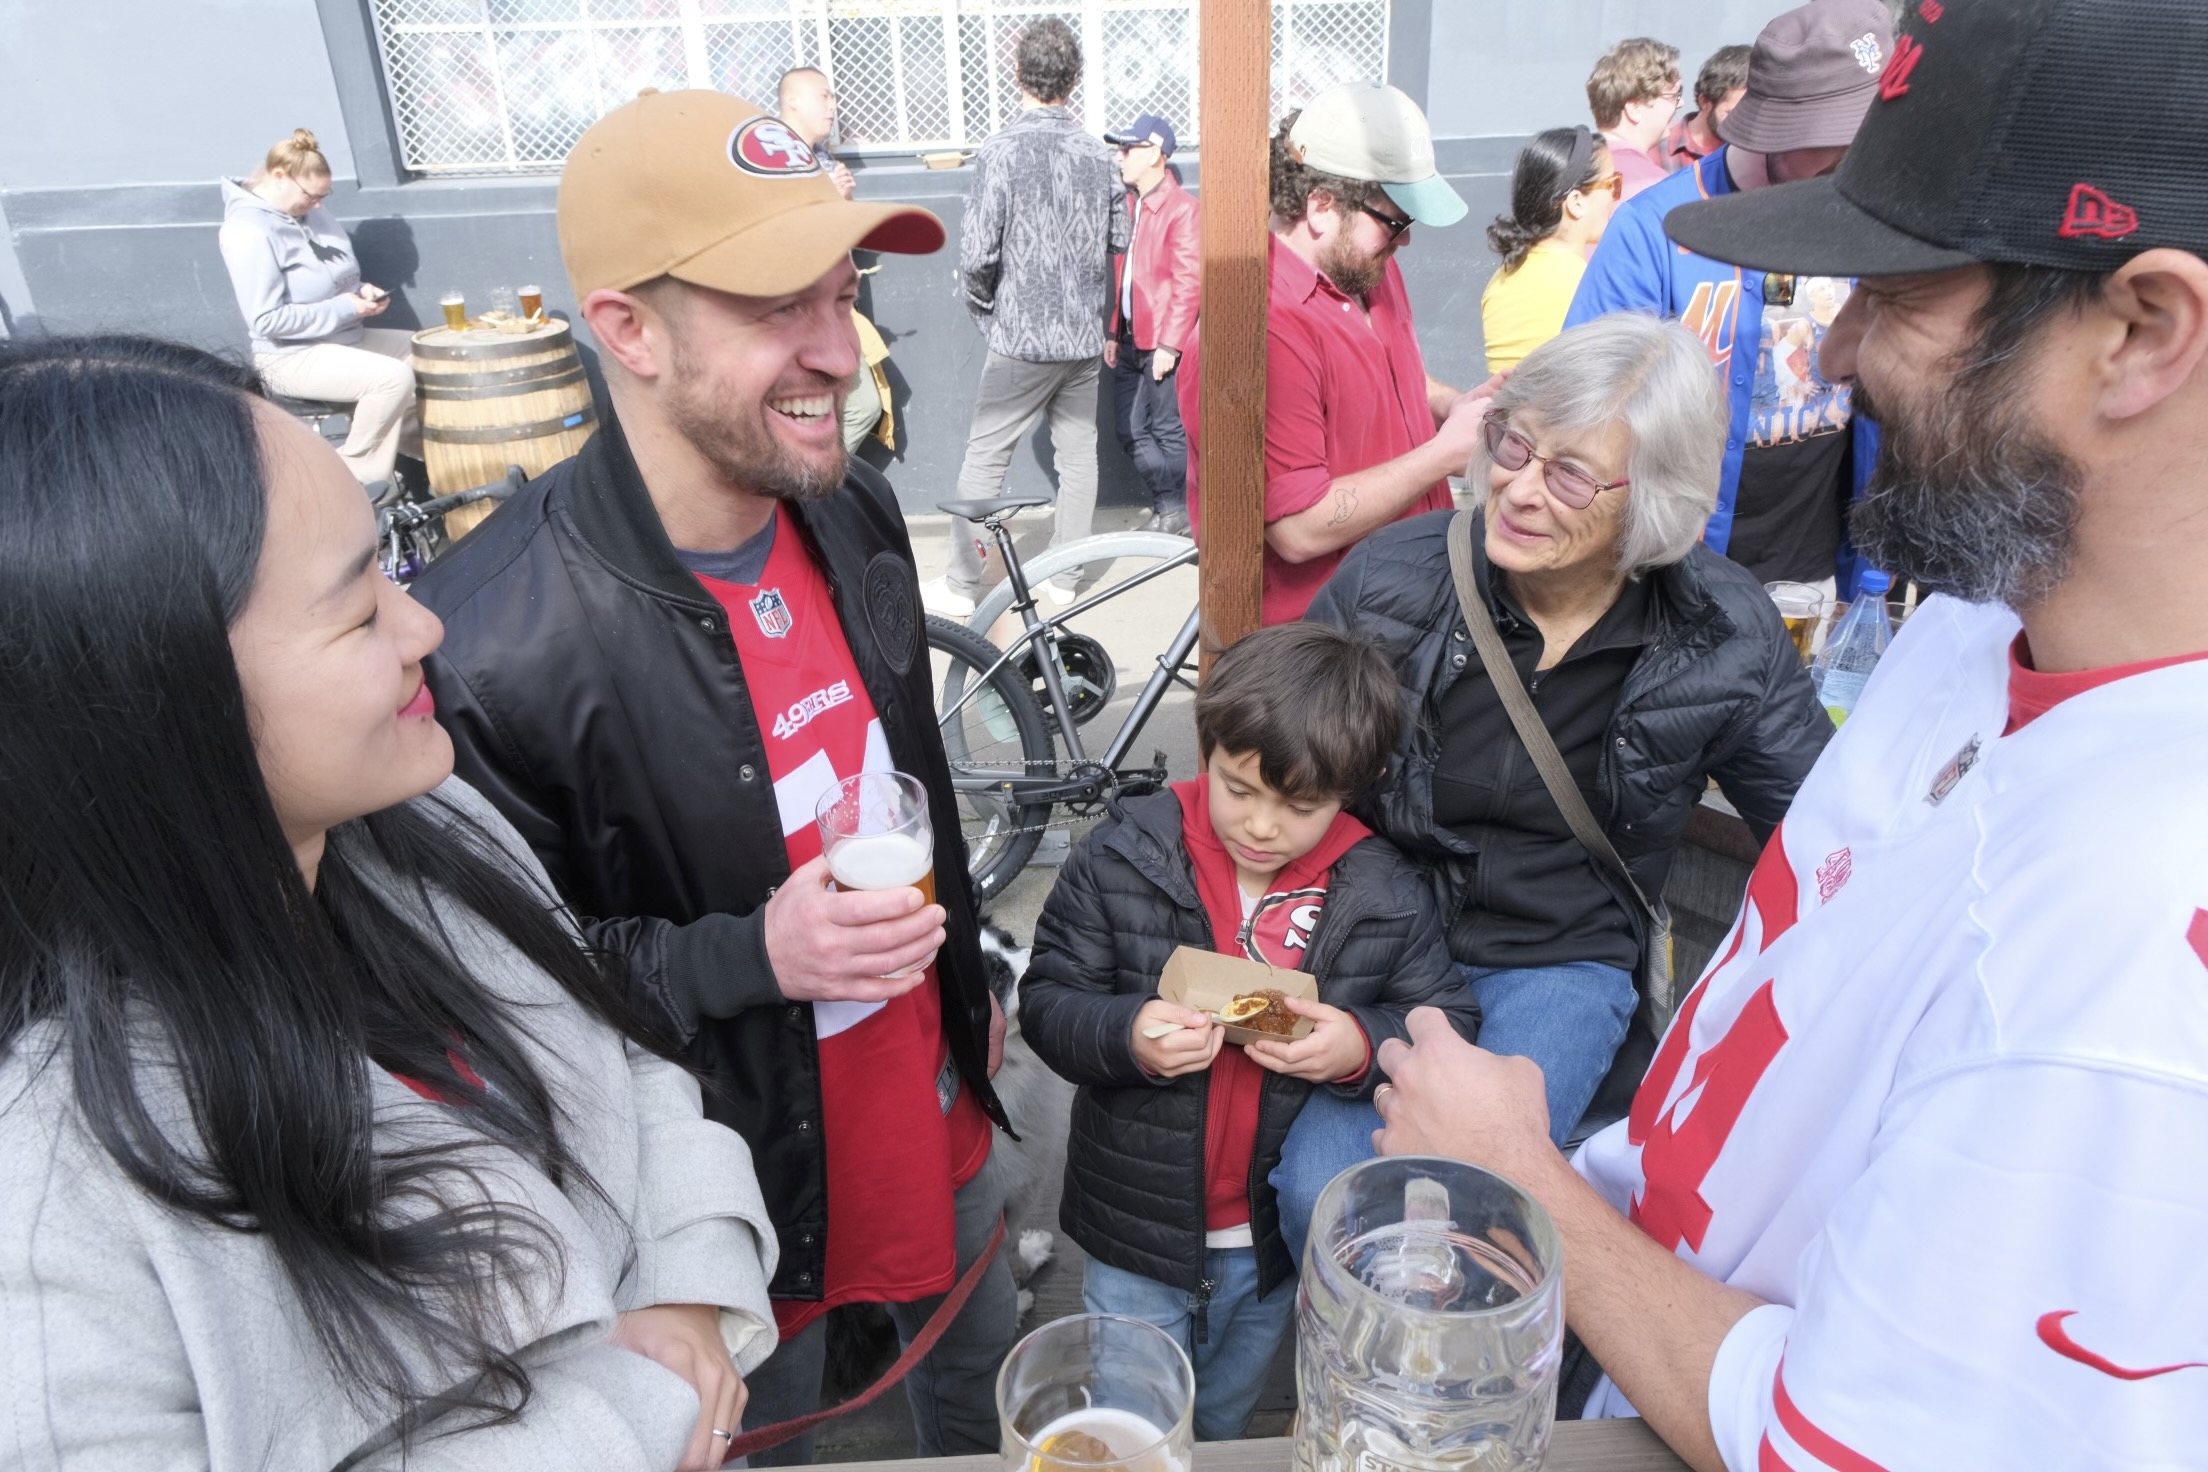 A group of people, some in sports attire, socializing outdoors with drinks; a child is focused on a snack.